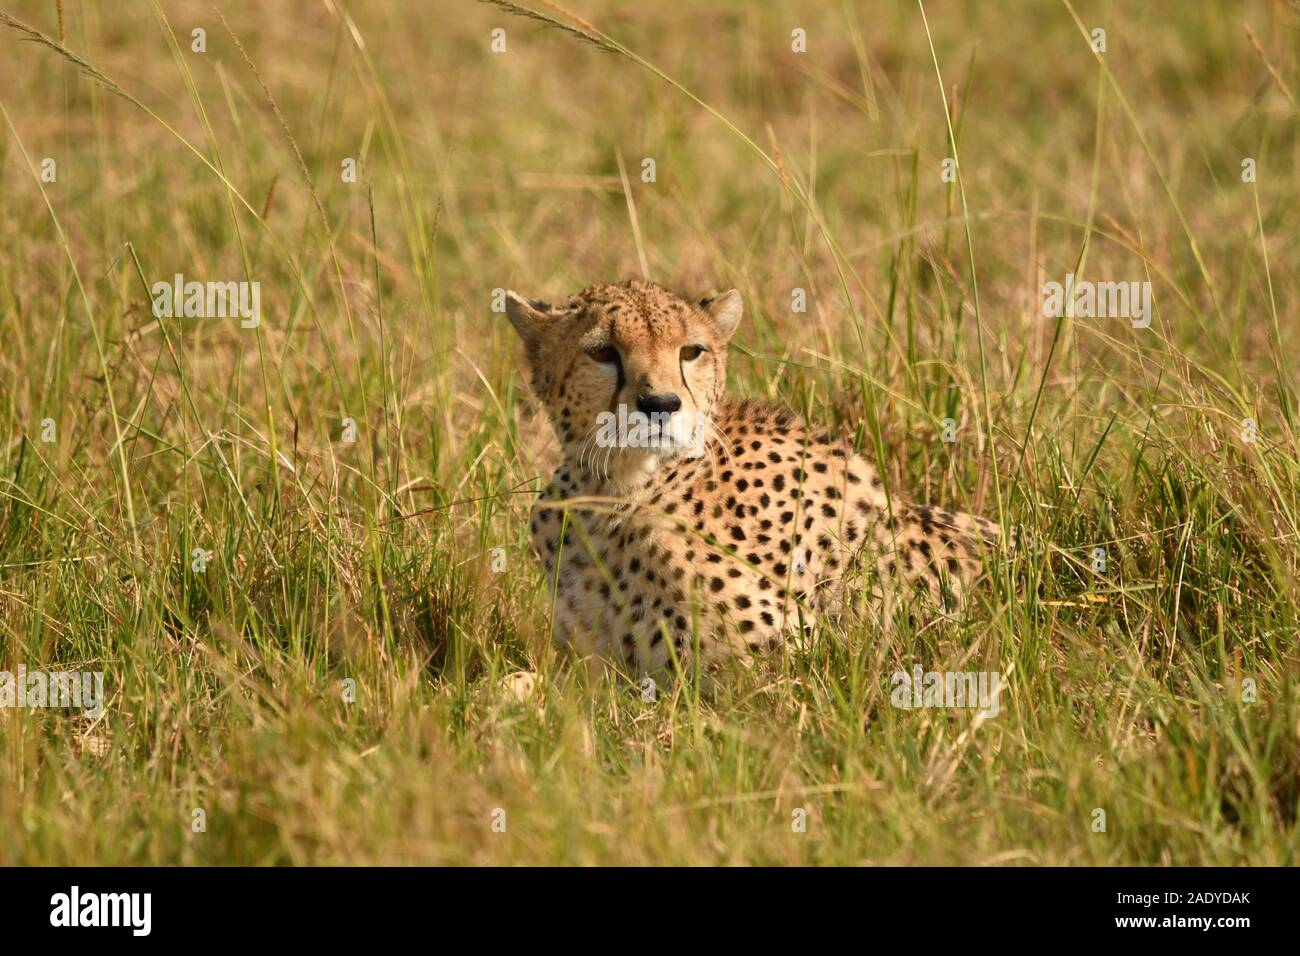 A Female Cheetah in Kenya's Masai Mara showing off her beautiful face having been disturbed by some unfamiliar sound Stock Photo